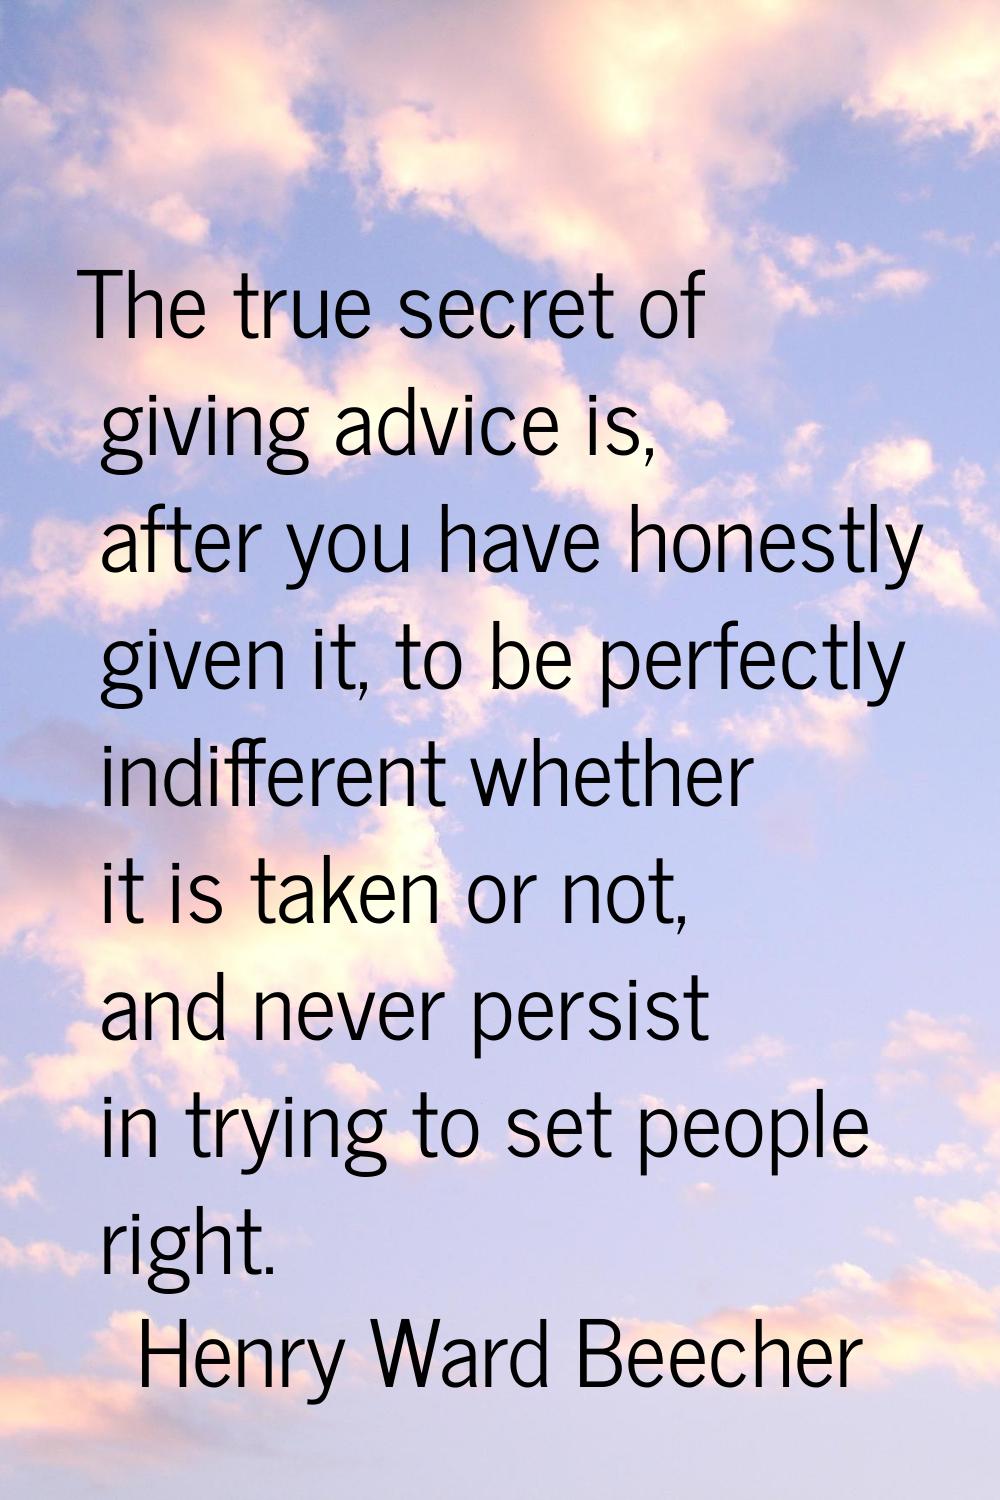 The true secret of giving advice is, after you have honestly given it, to be perfectly indifferent 